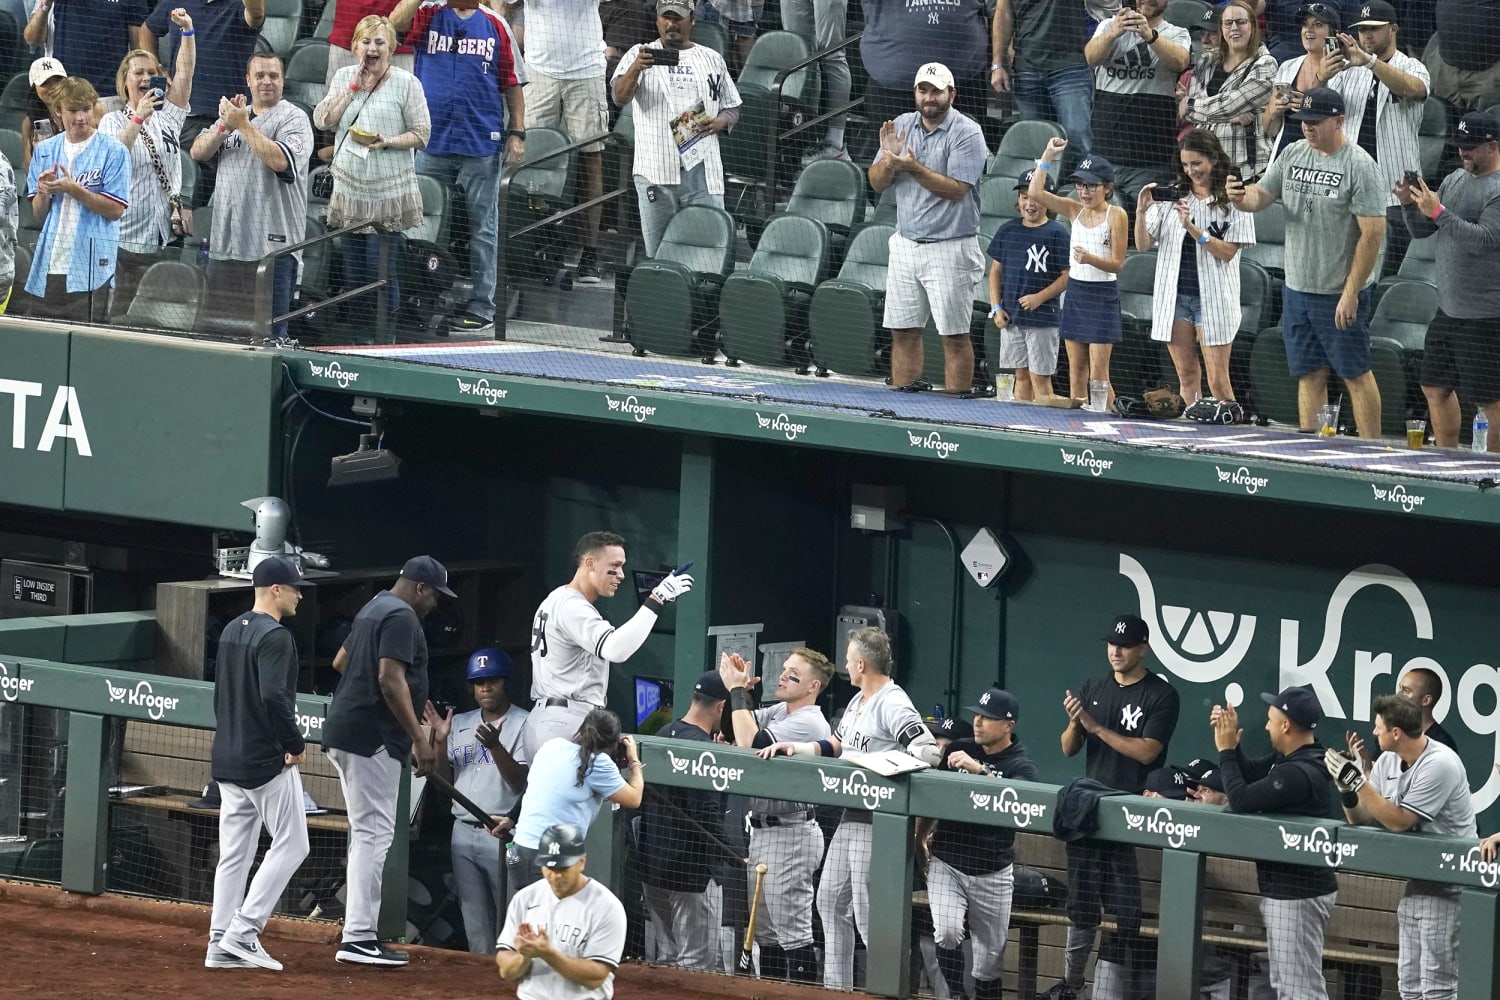 Aaron Judge going for home run No. 62 against Texas Rangers